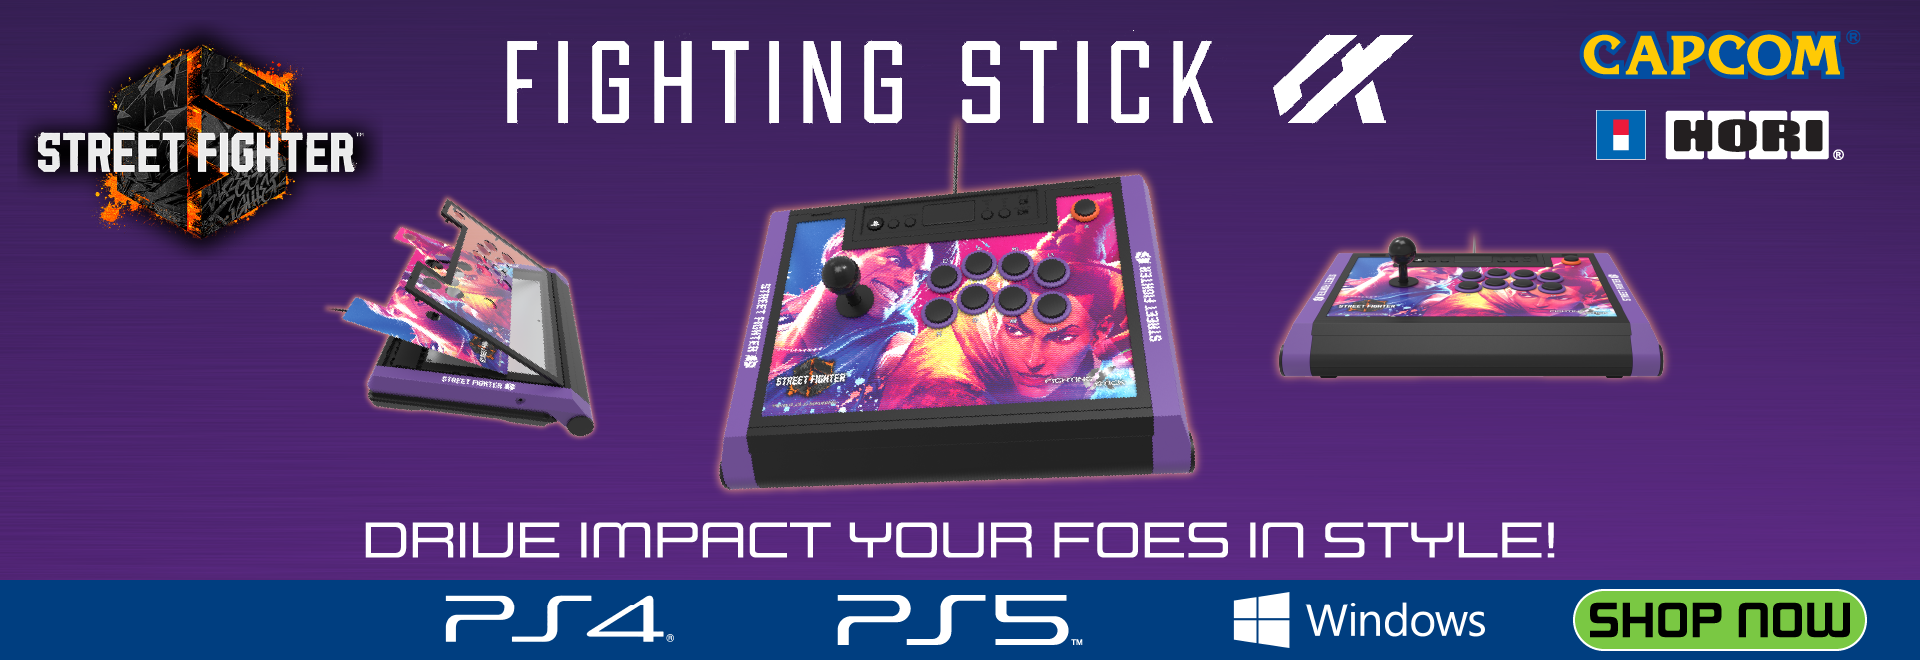 Street Fighter 6 Fighting Stick Alpha by Hori